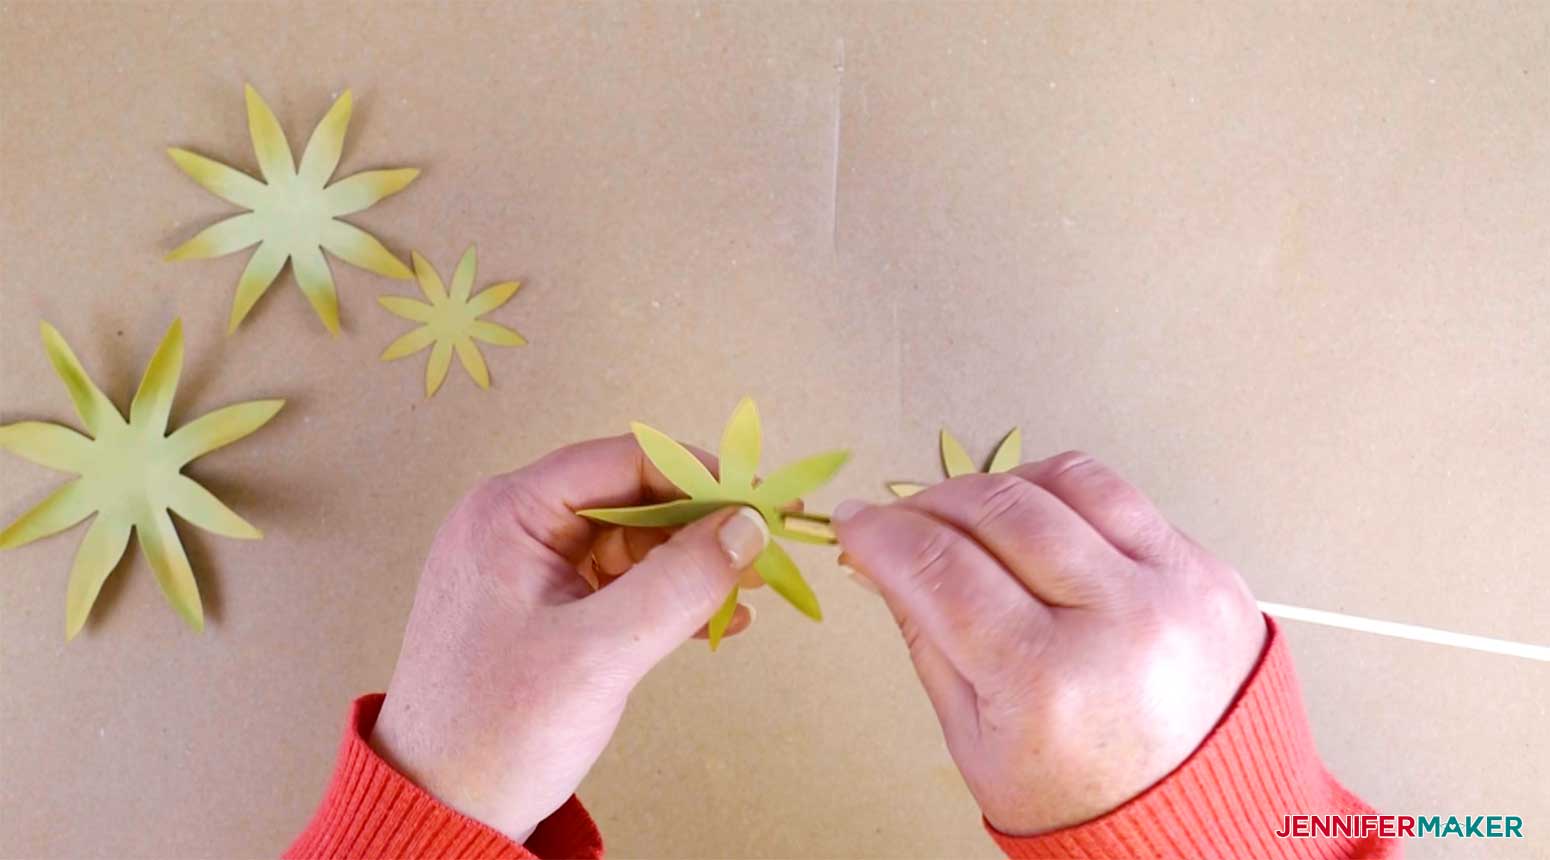 Use a dowel to shape the succulent leaves for my paper succulents project